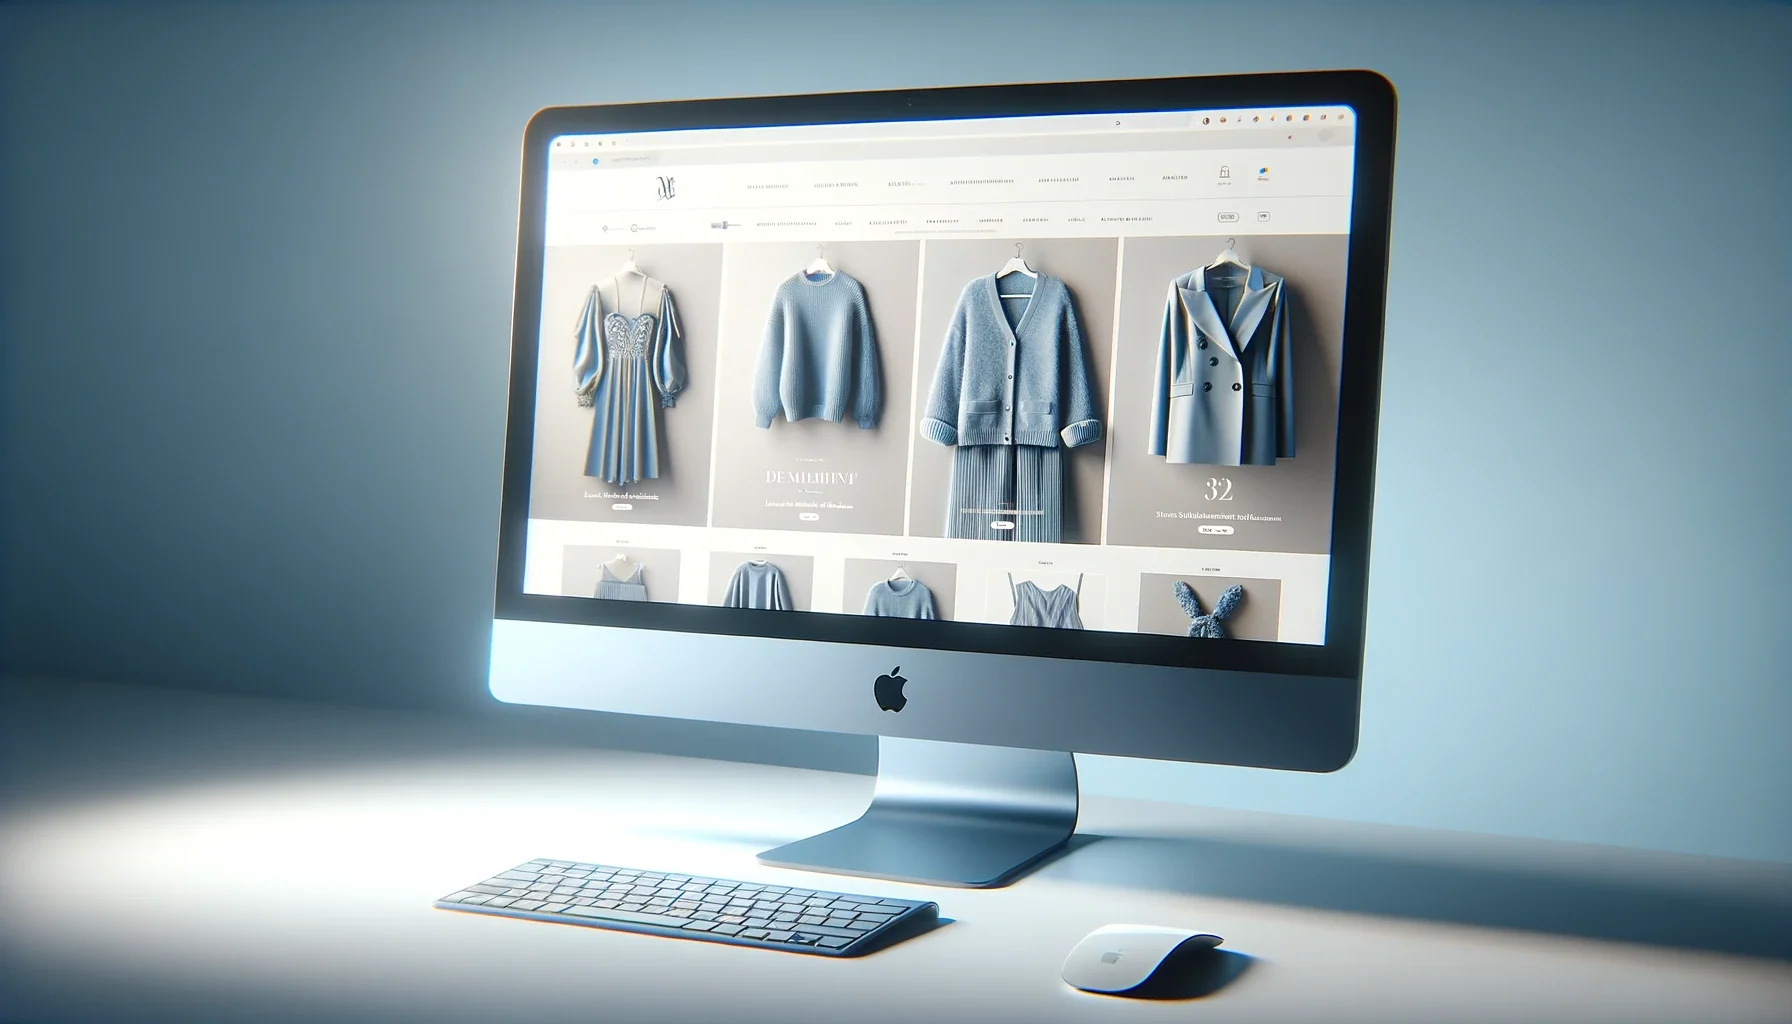 An iMac displaying a sleek, modern clothing-related eCommerce website